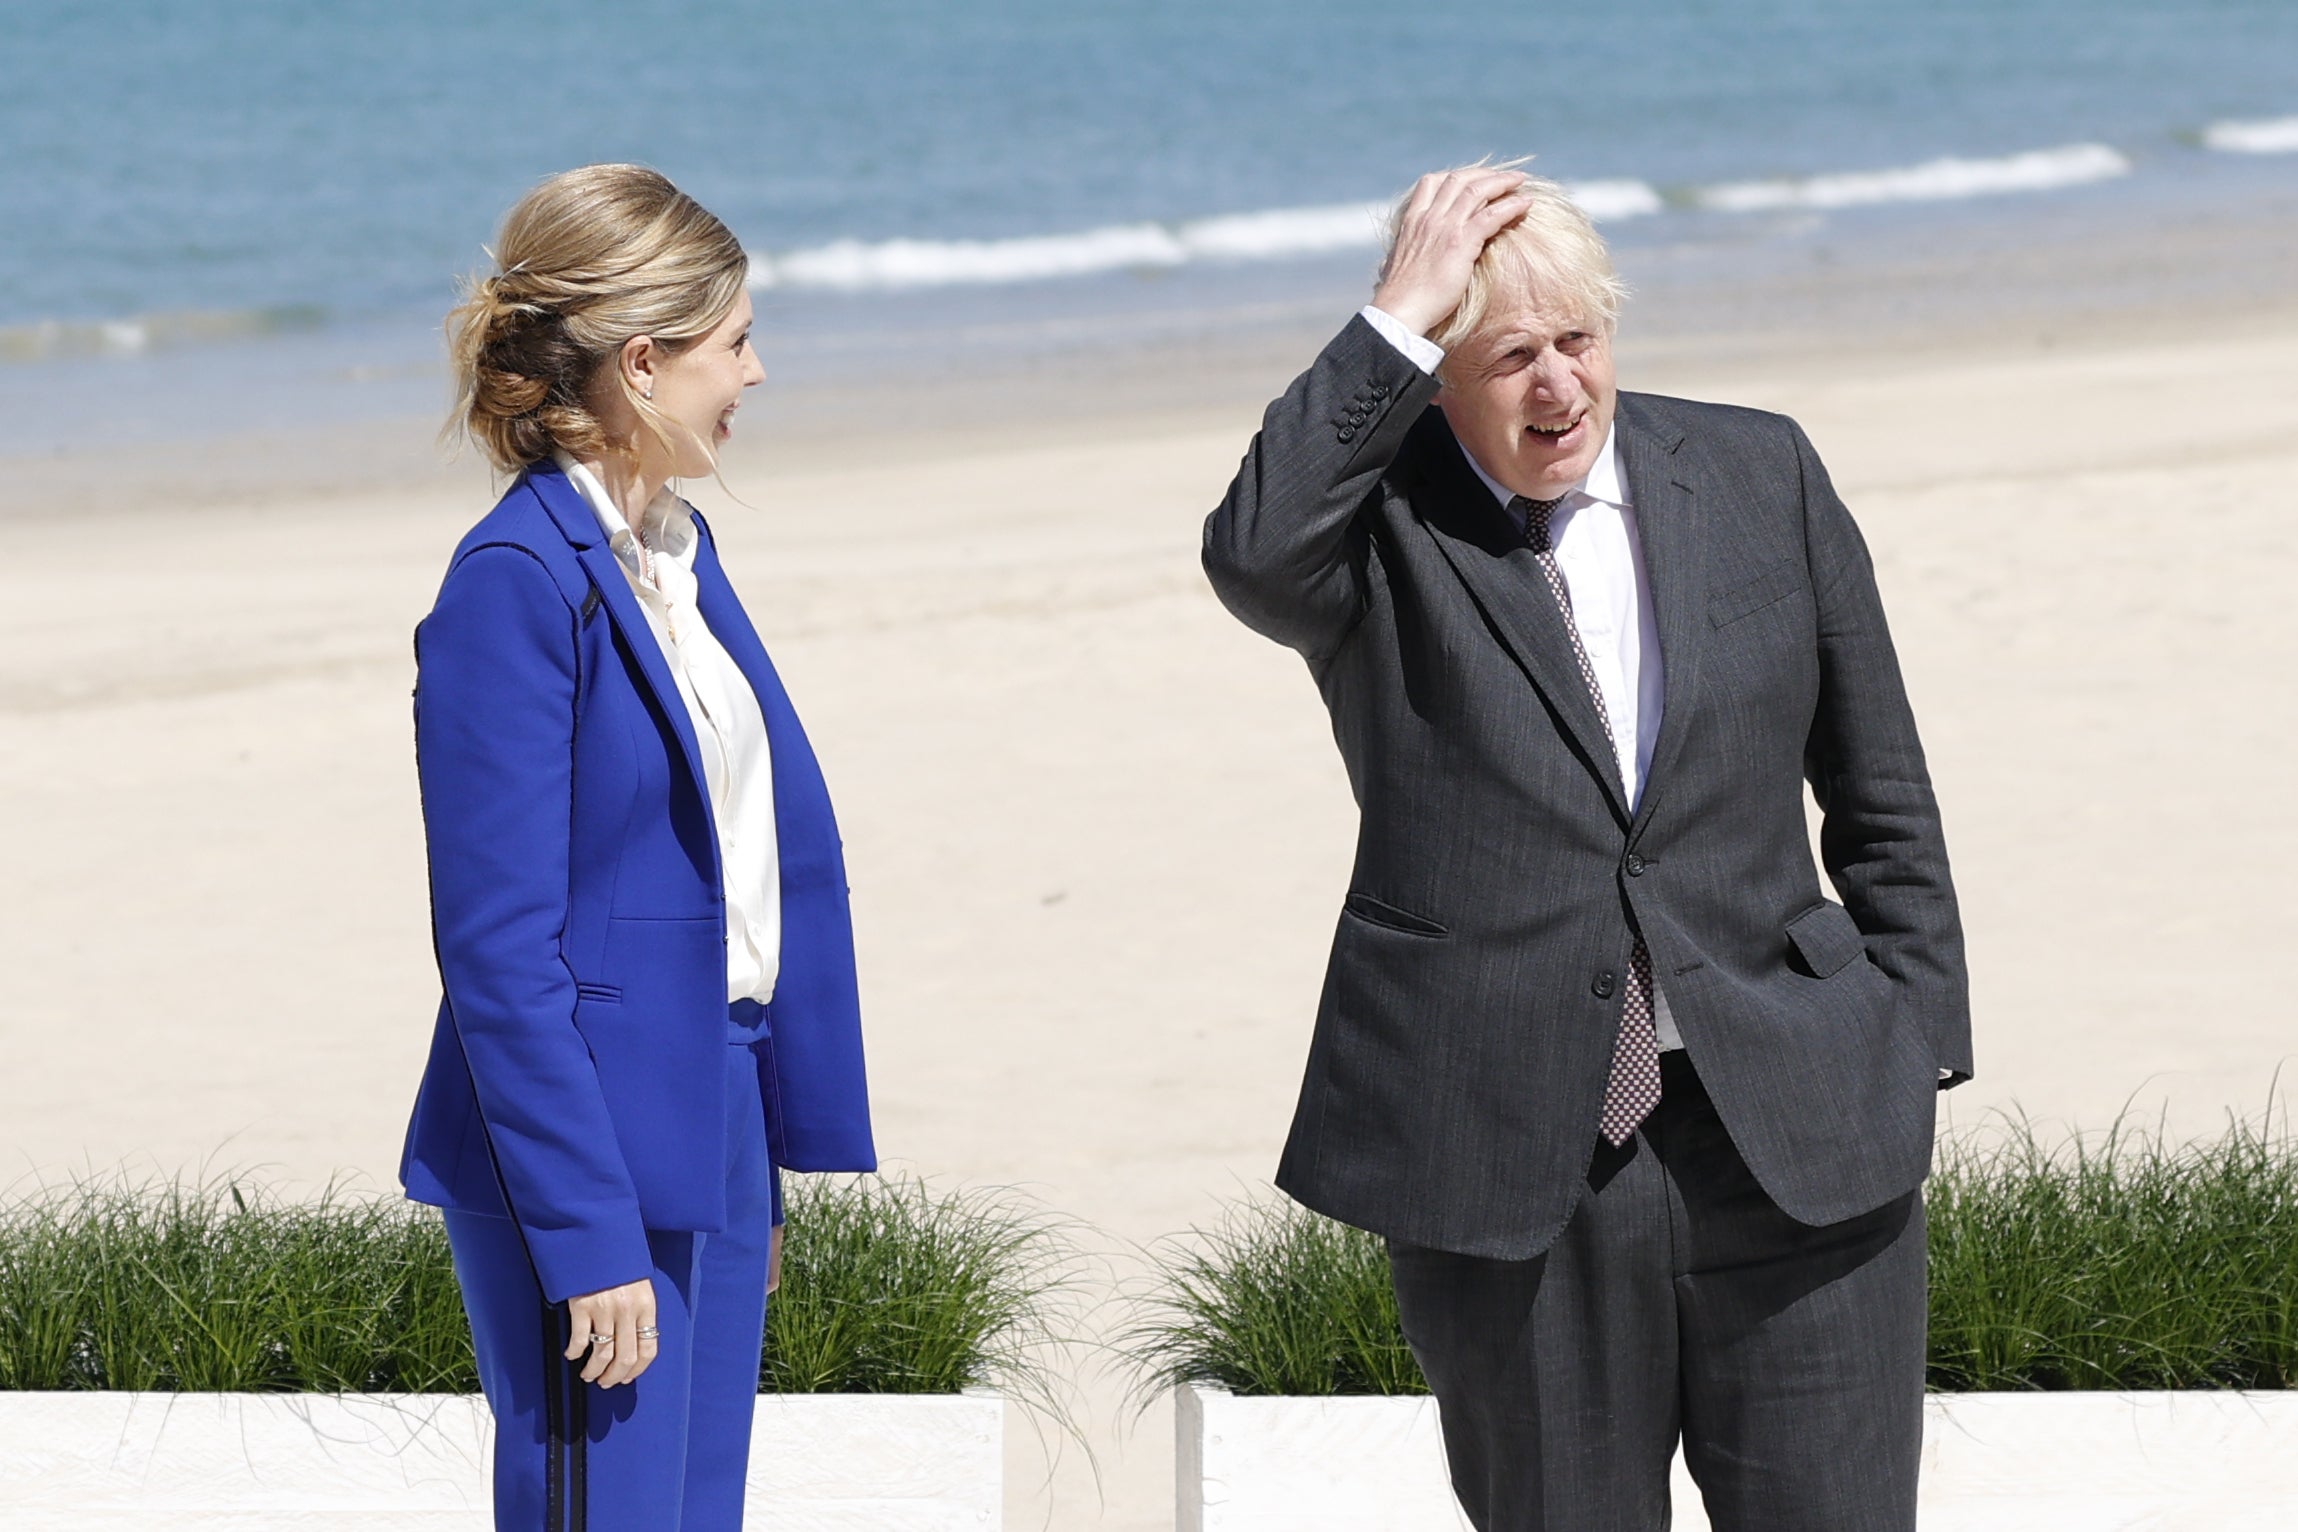 Prime Minister Boris Johnson and his wife Carrie wait for arrivals during an official welcome of guests at the G7 summit in Cornwall (Adrian Dennis/PA)